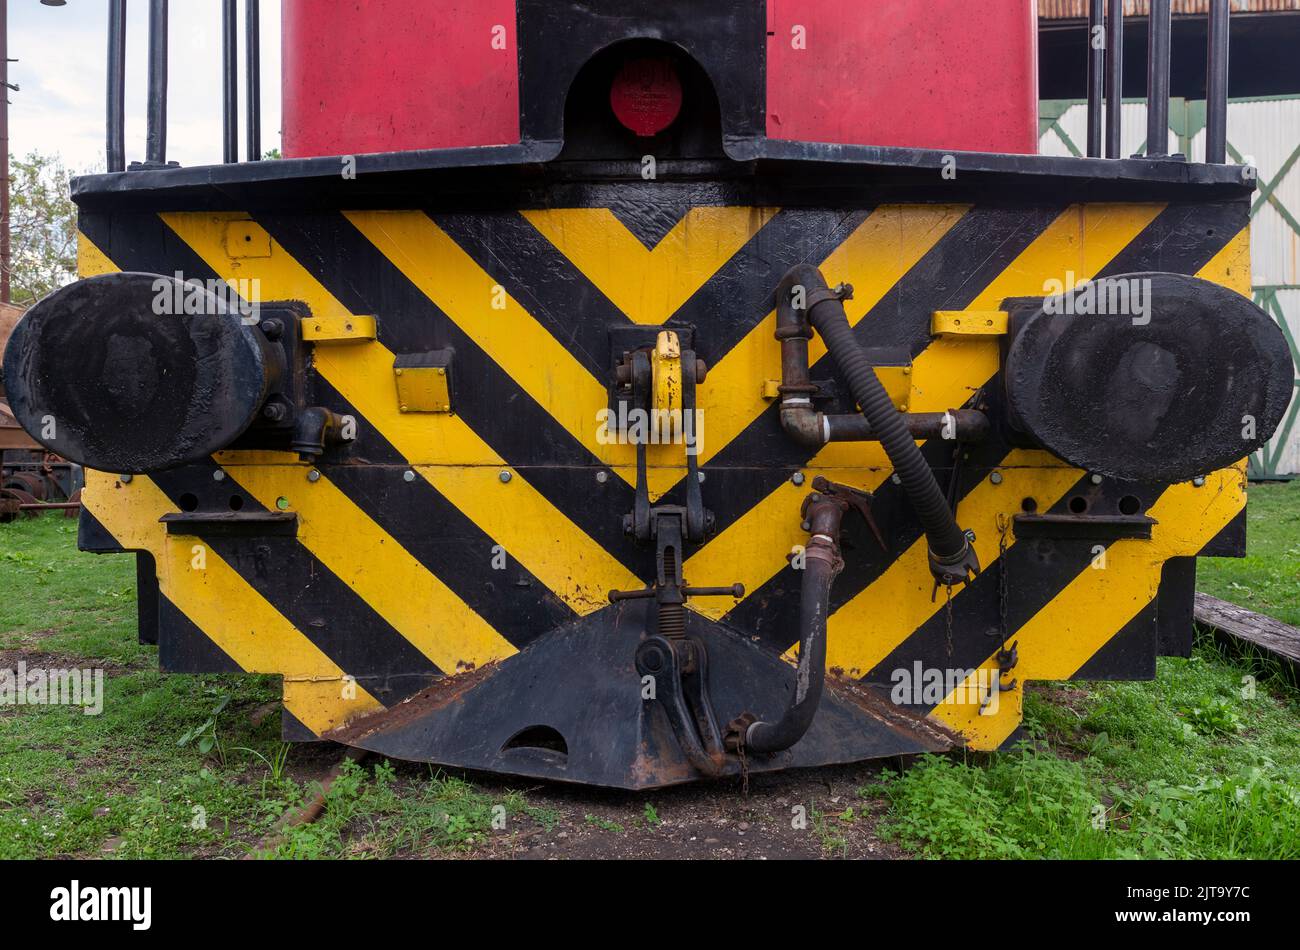 front view of old locomotive Stock Photo